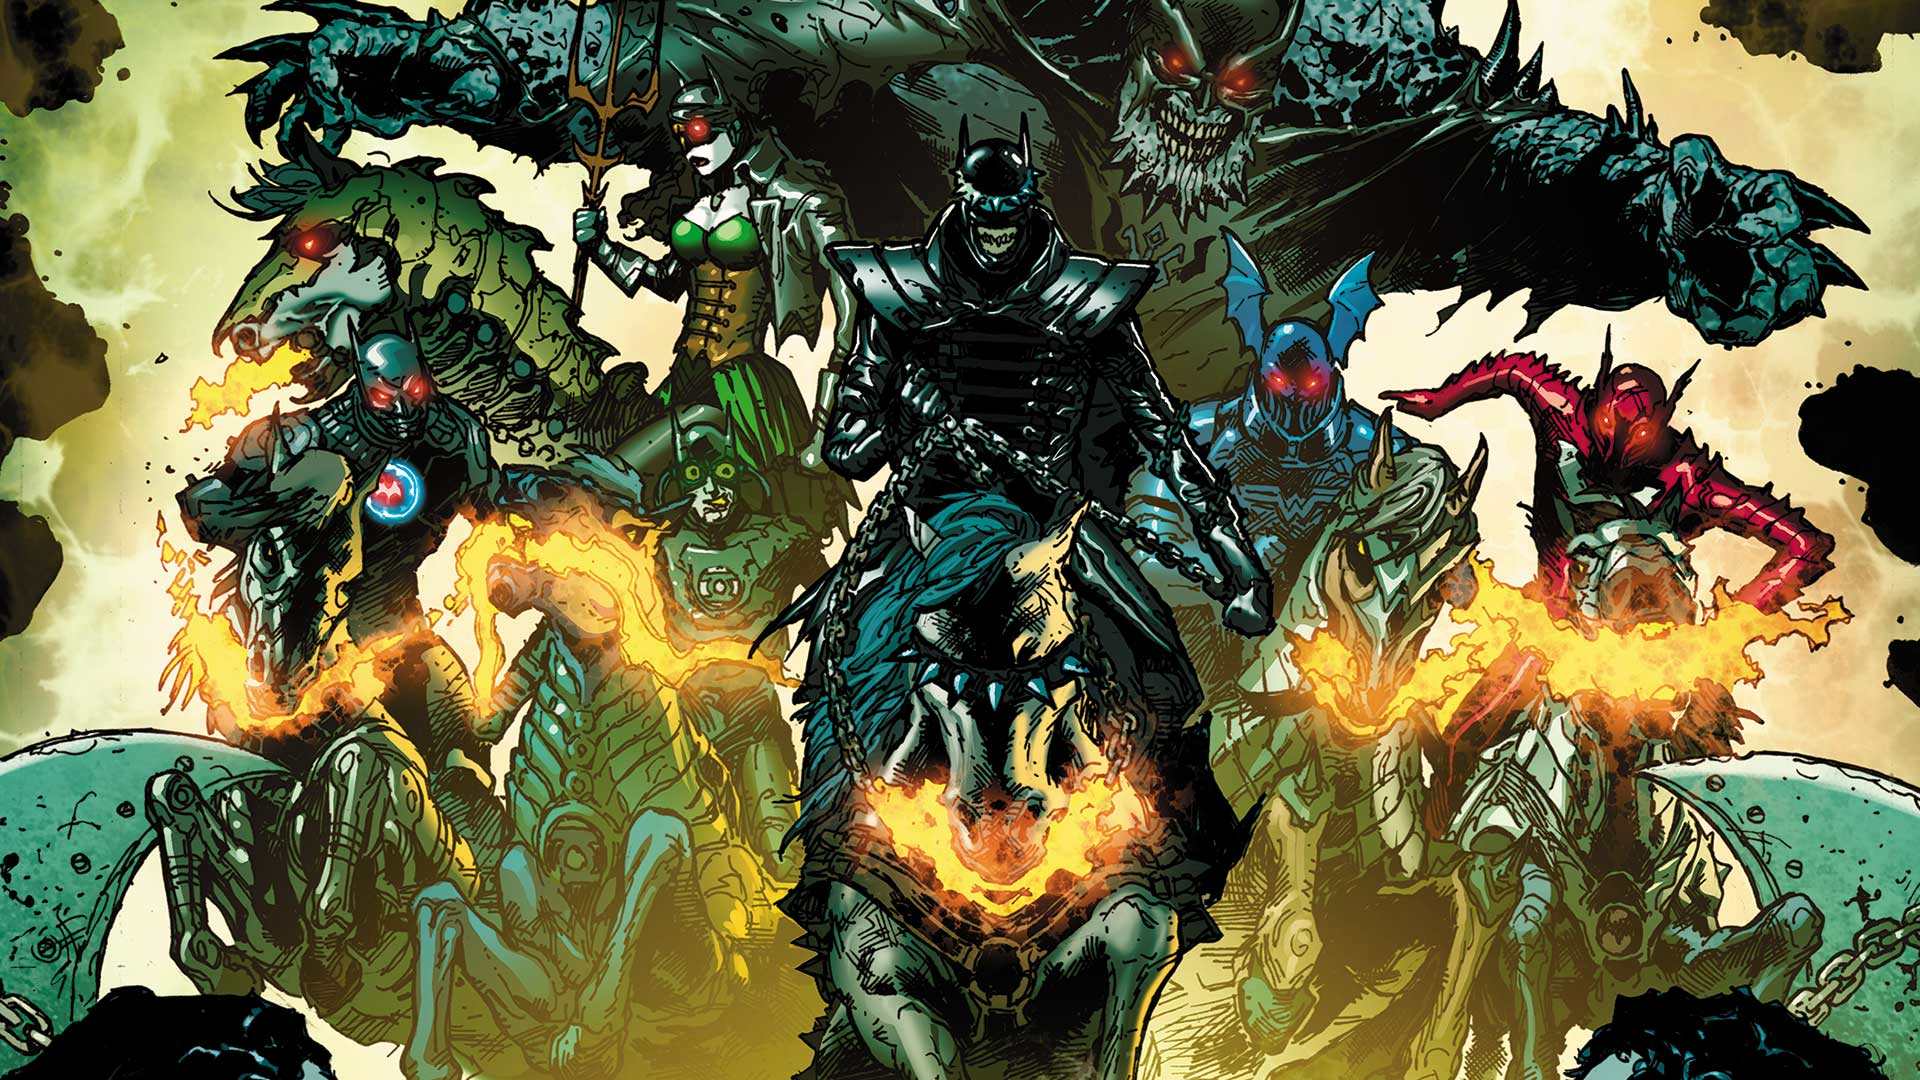 EXCLUSIVE: The World of Metal Expands in Dark Knights Rising